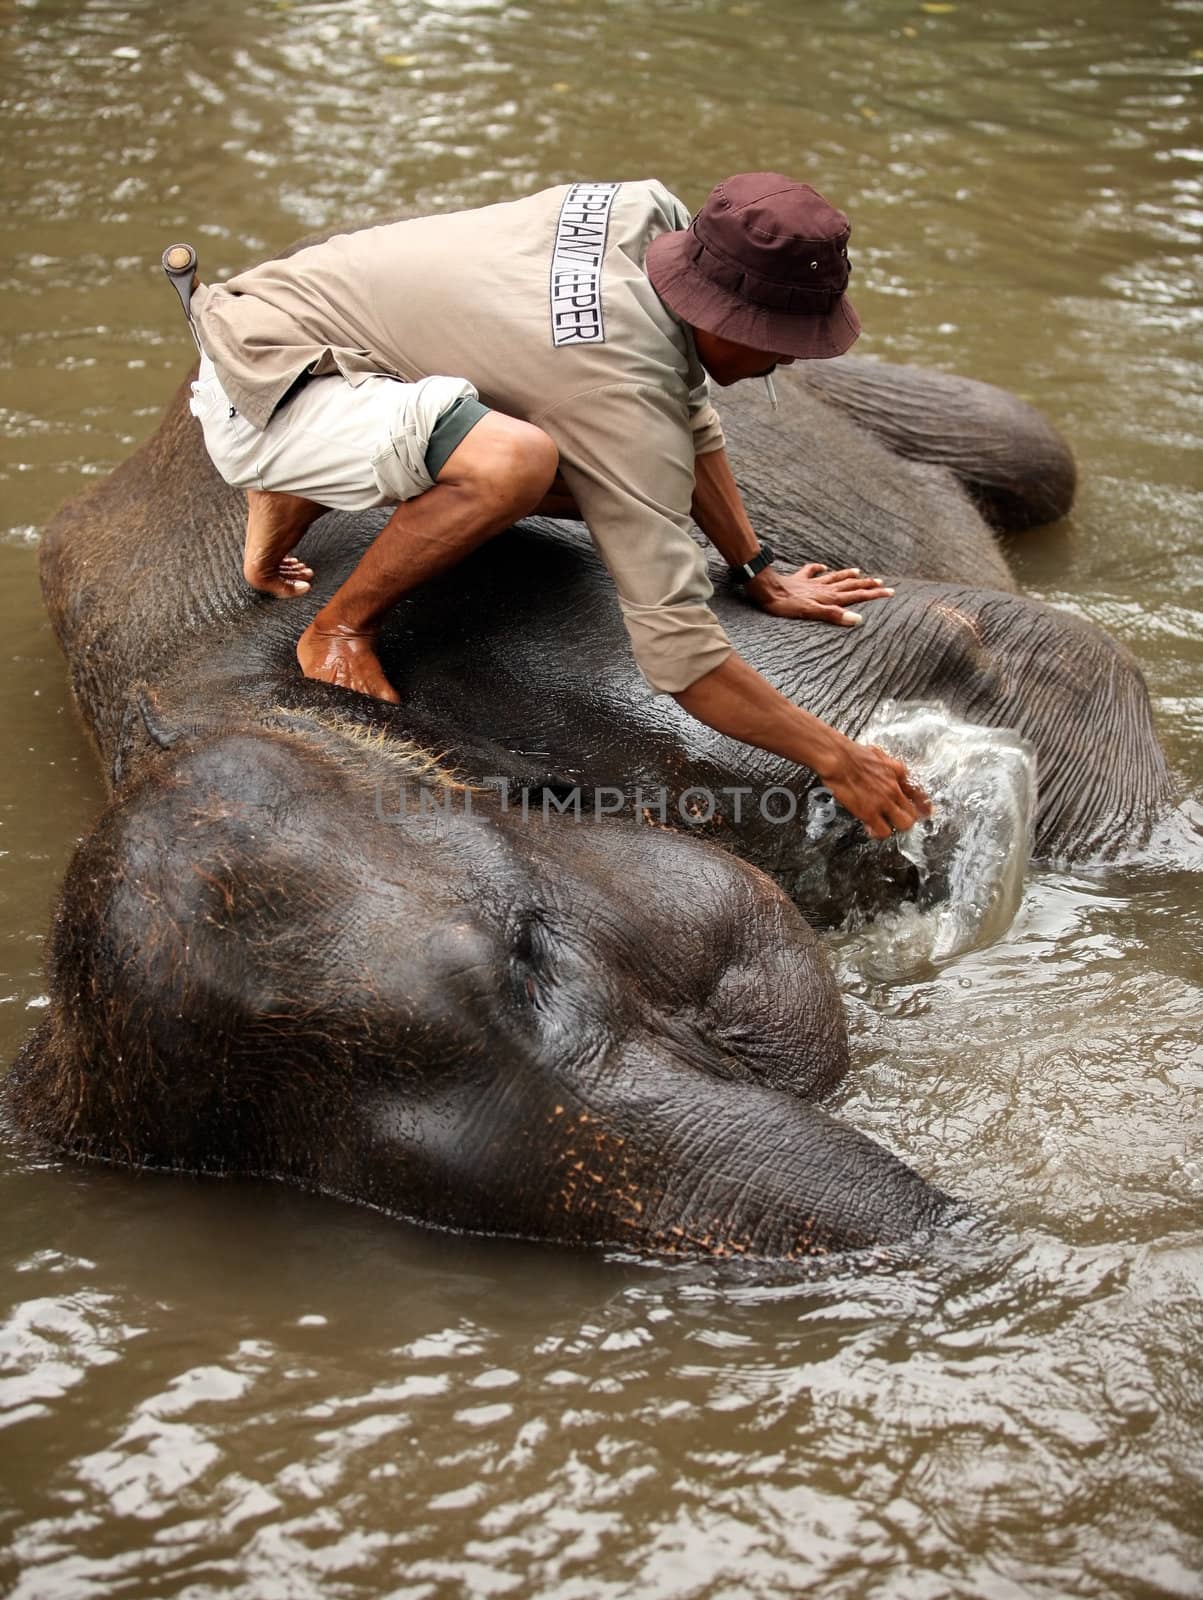 The man washes the elephant 